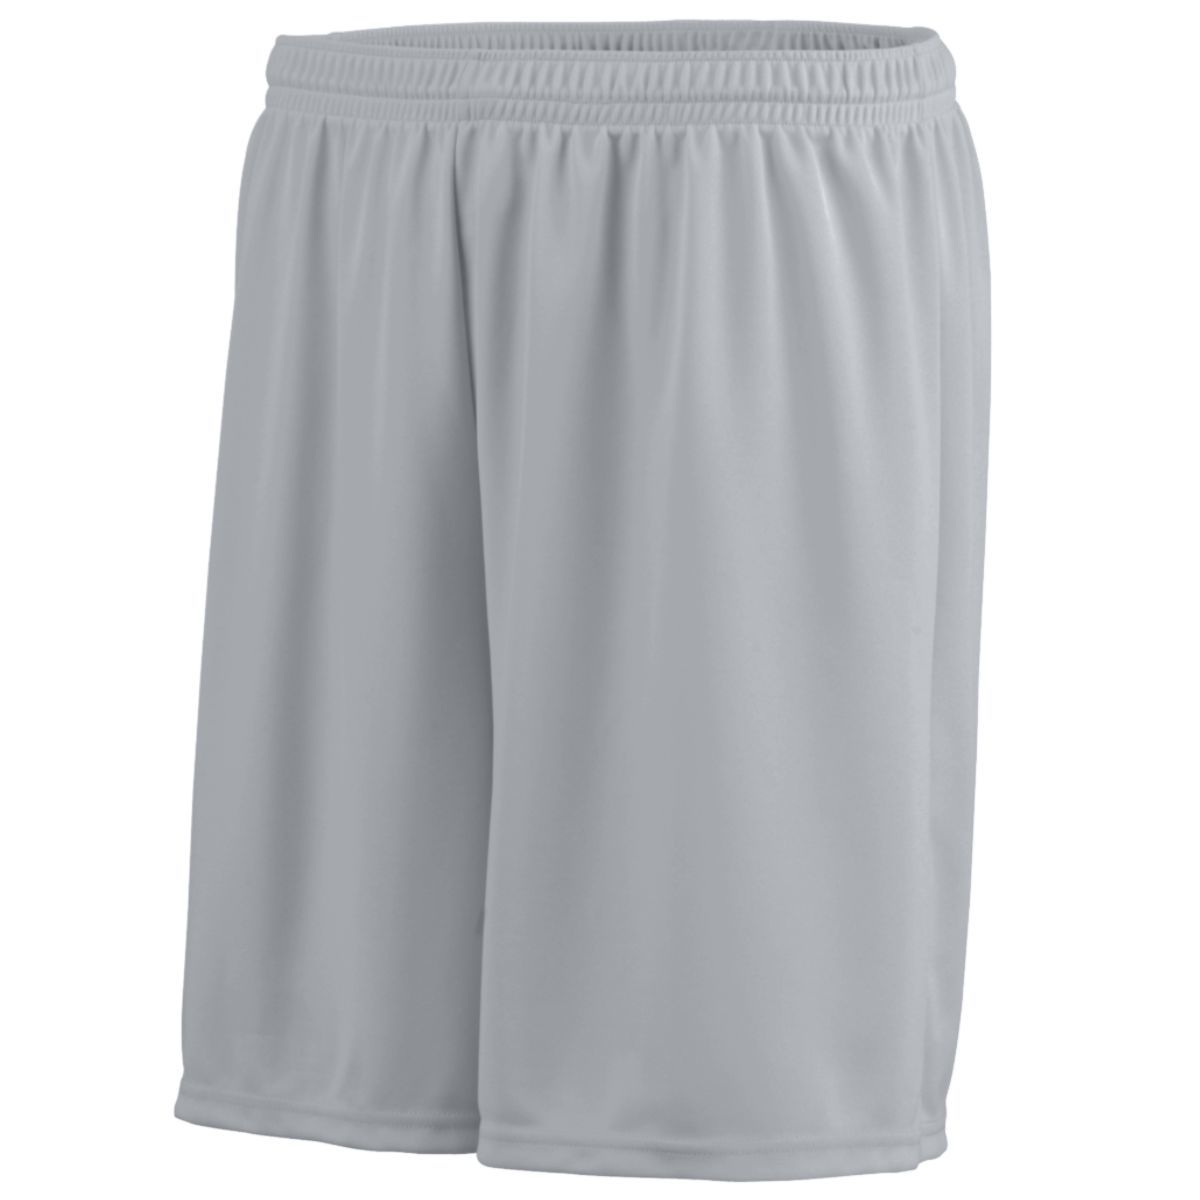 Augusta Sportswear Octane Shorts in Silver Grey  -Part of the Adult, Adult-Shorts, Augusta-Products product lines at KanaleyCreations.com